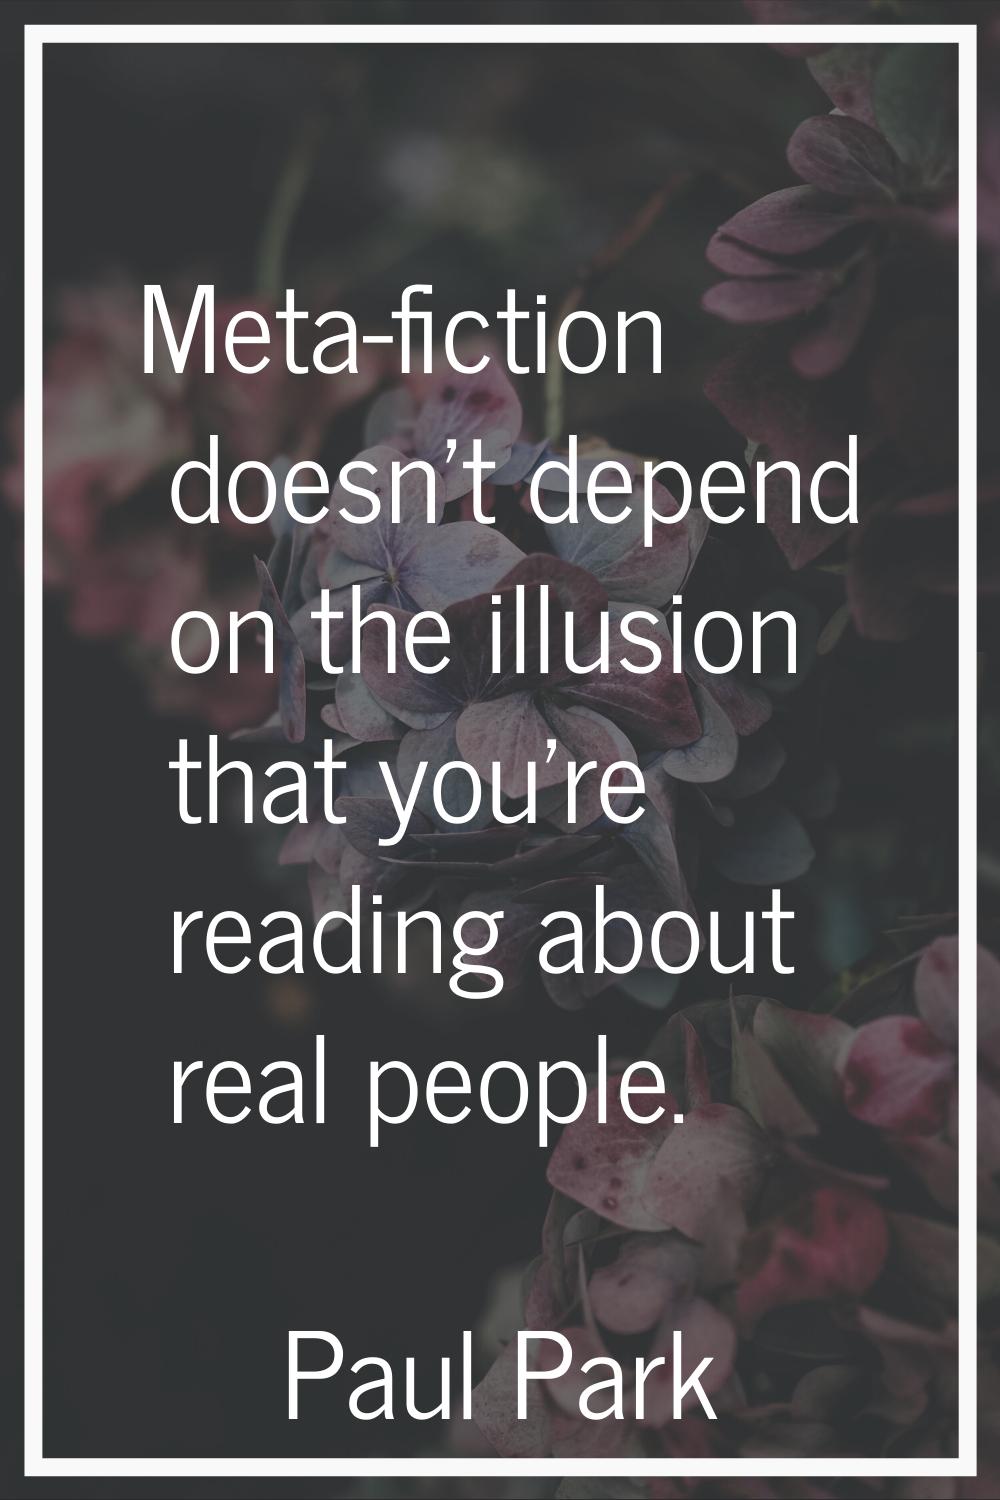 Meta-fiction doesn't depend on the illusion that you're reading about real people.